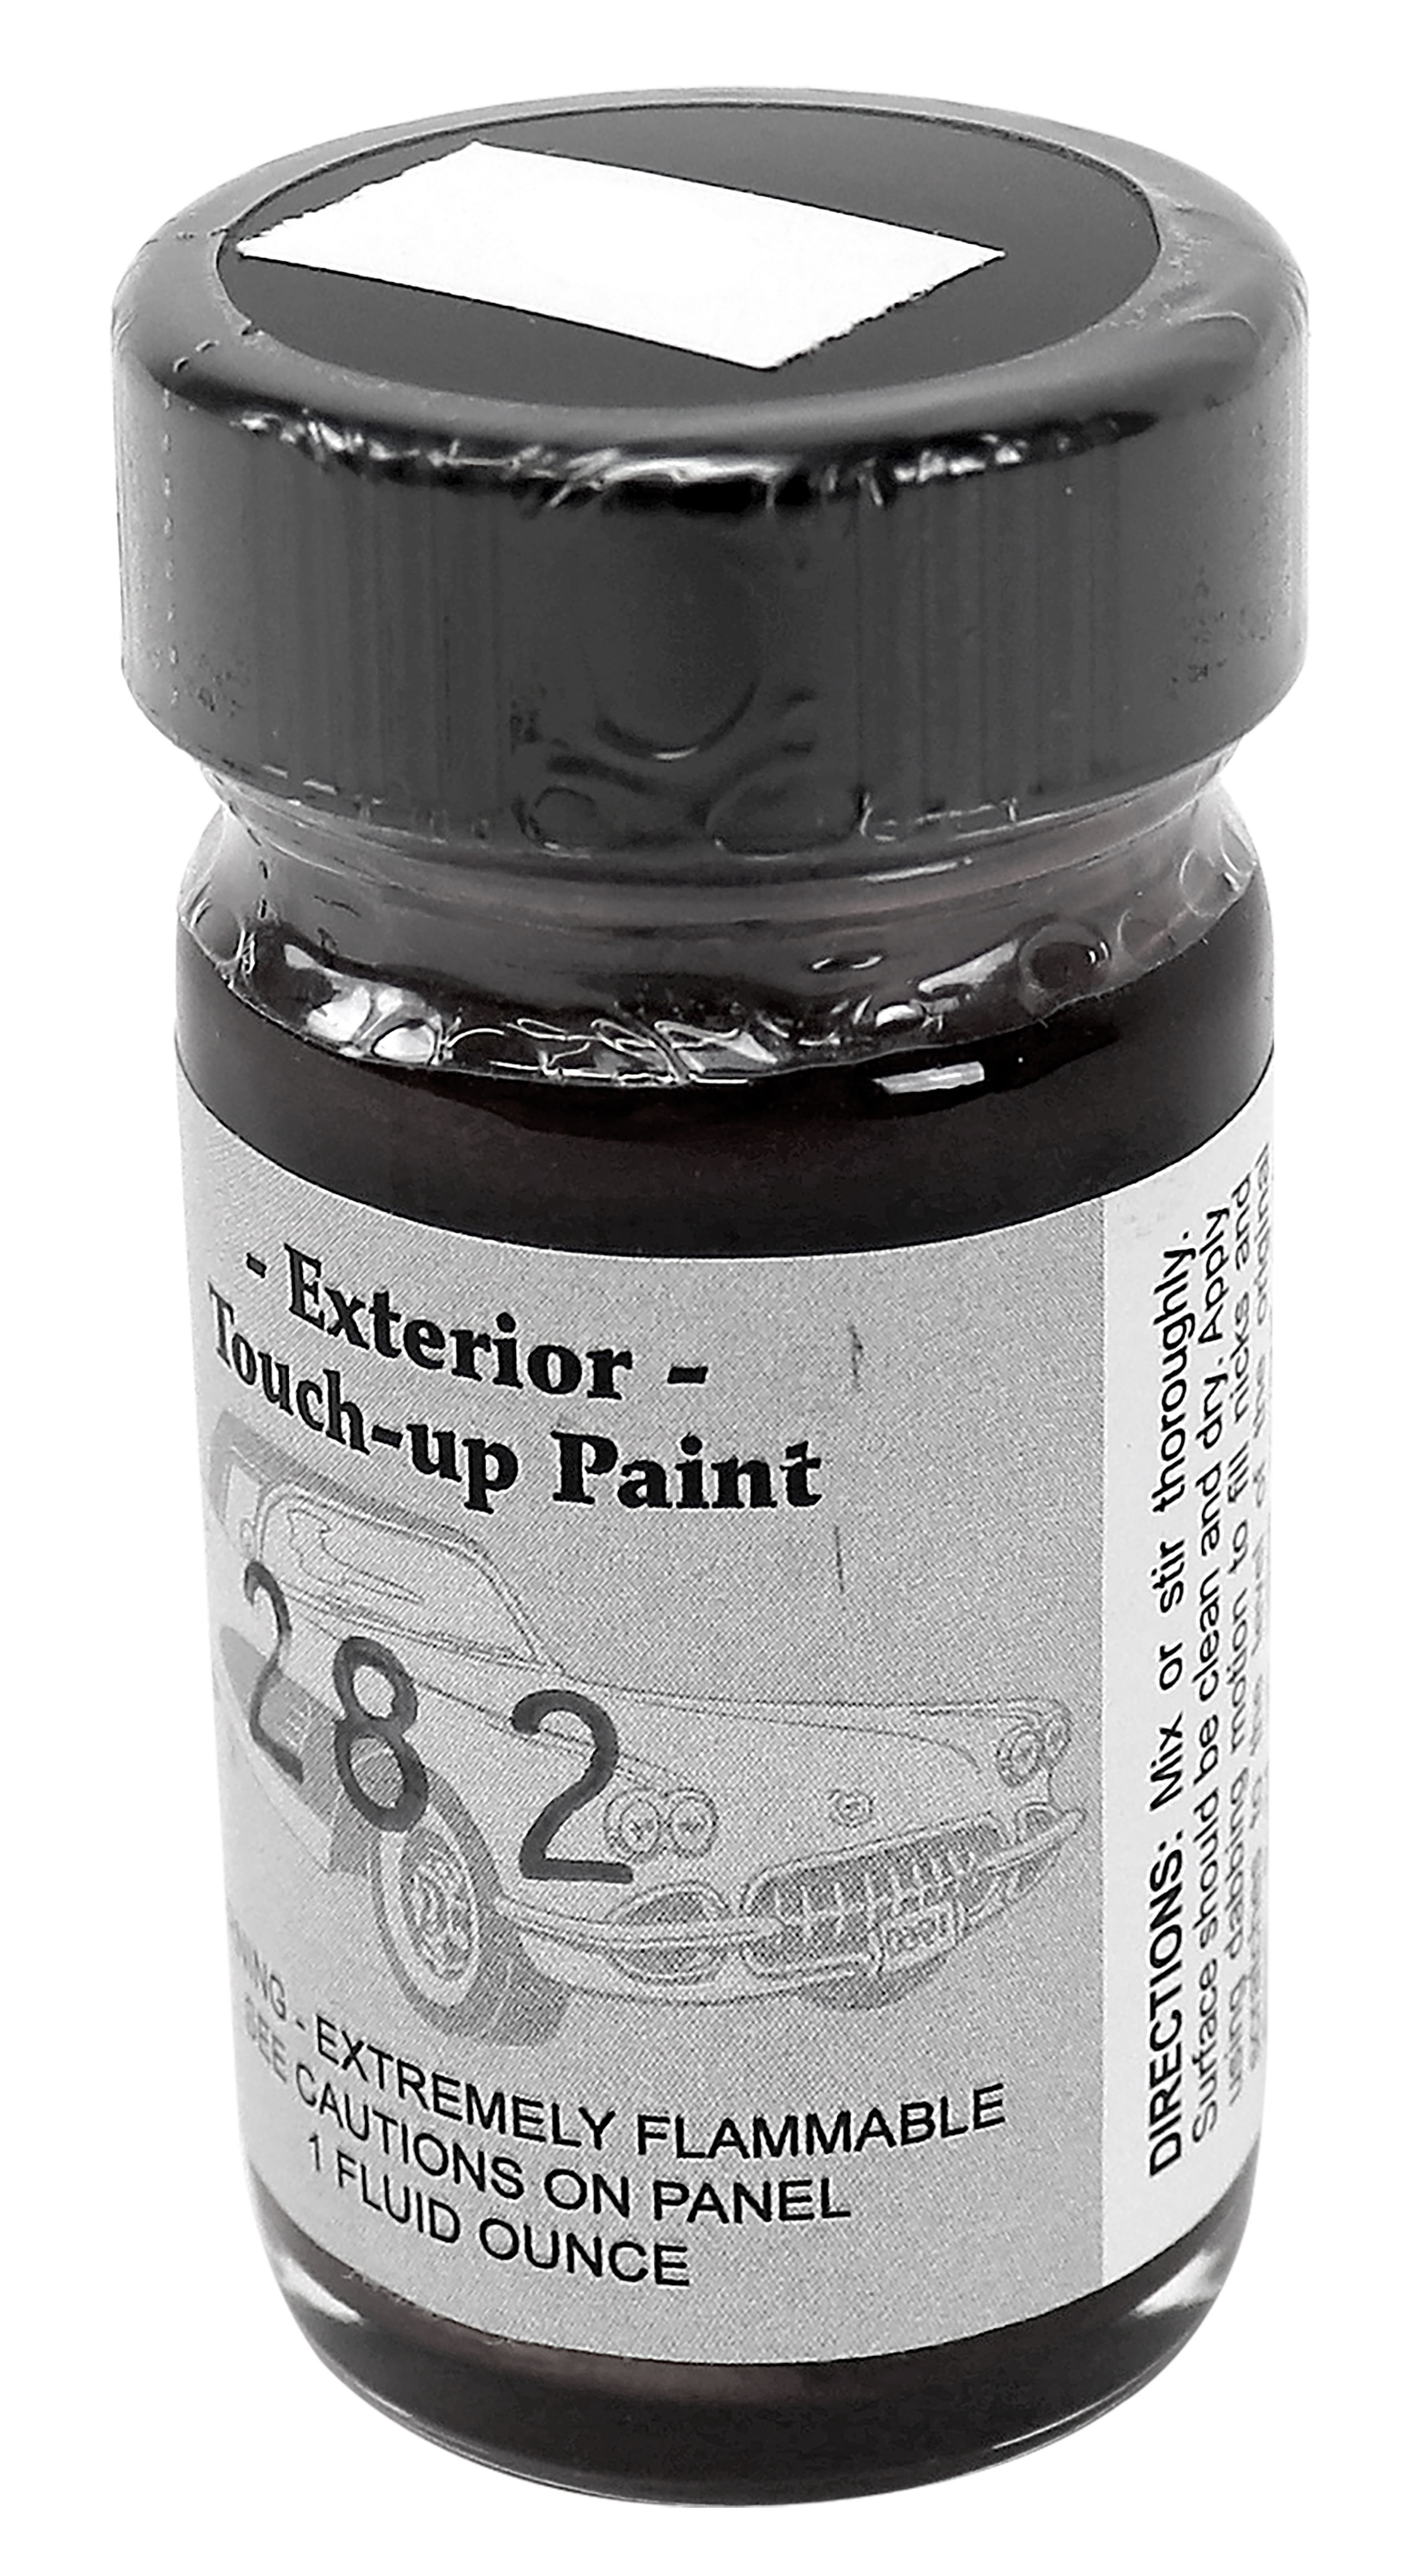 C6 2008-2013 Chevrolet Corvette Touch-Up Paint. Crystal Red Top Coat Clear - Code 89 - CA